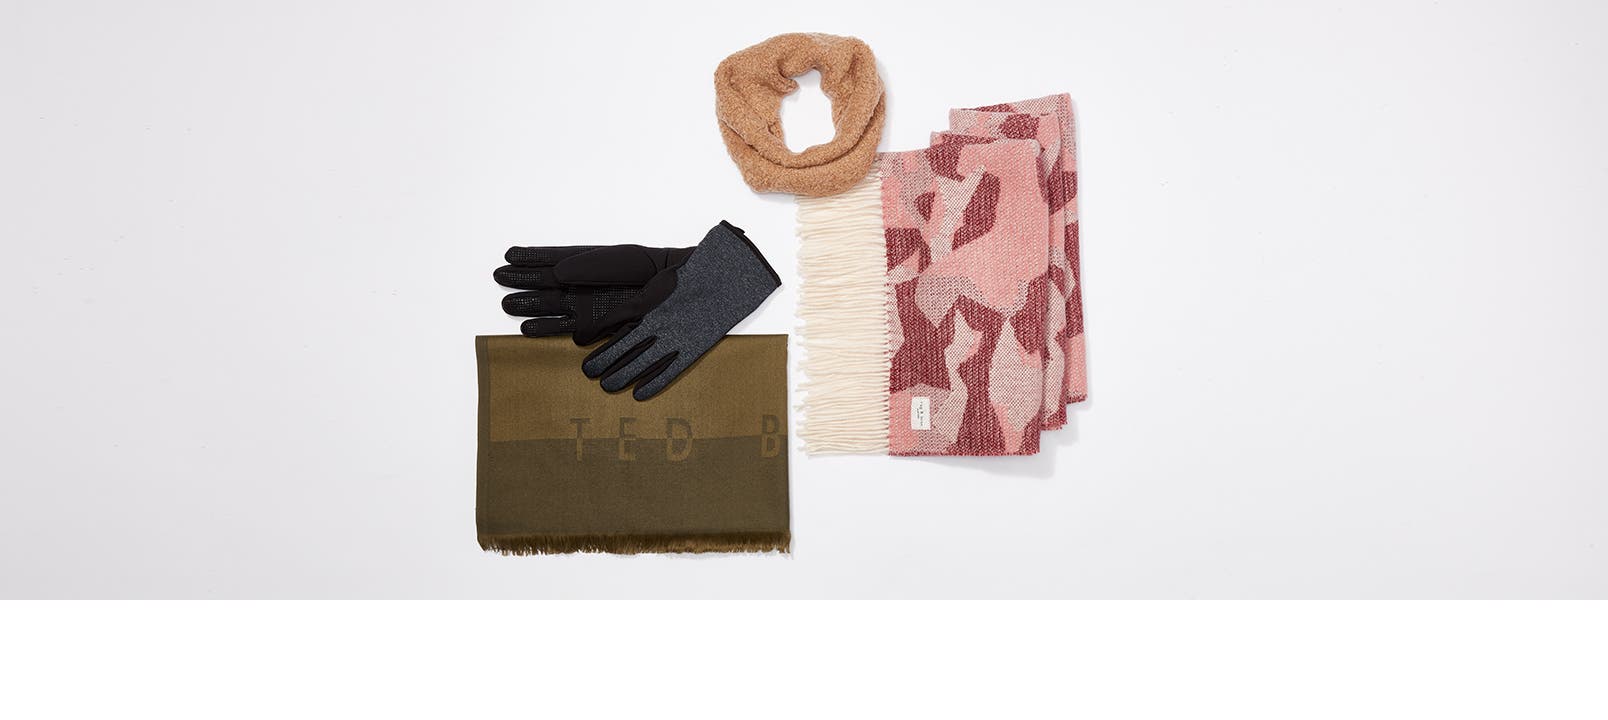 An assortment of gloves and scarves on a white background.